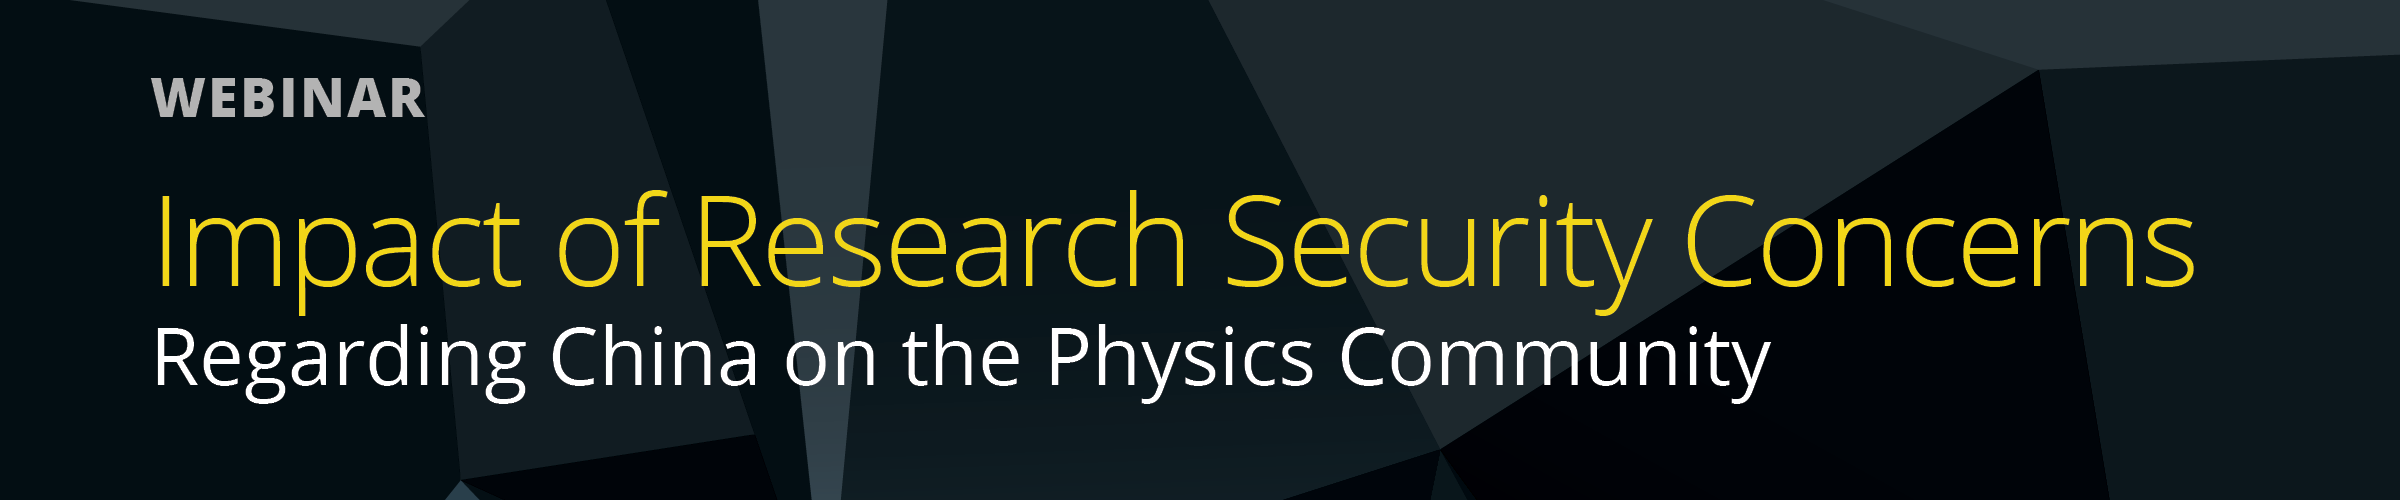 Webinar Impact Research Security banner